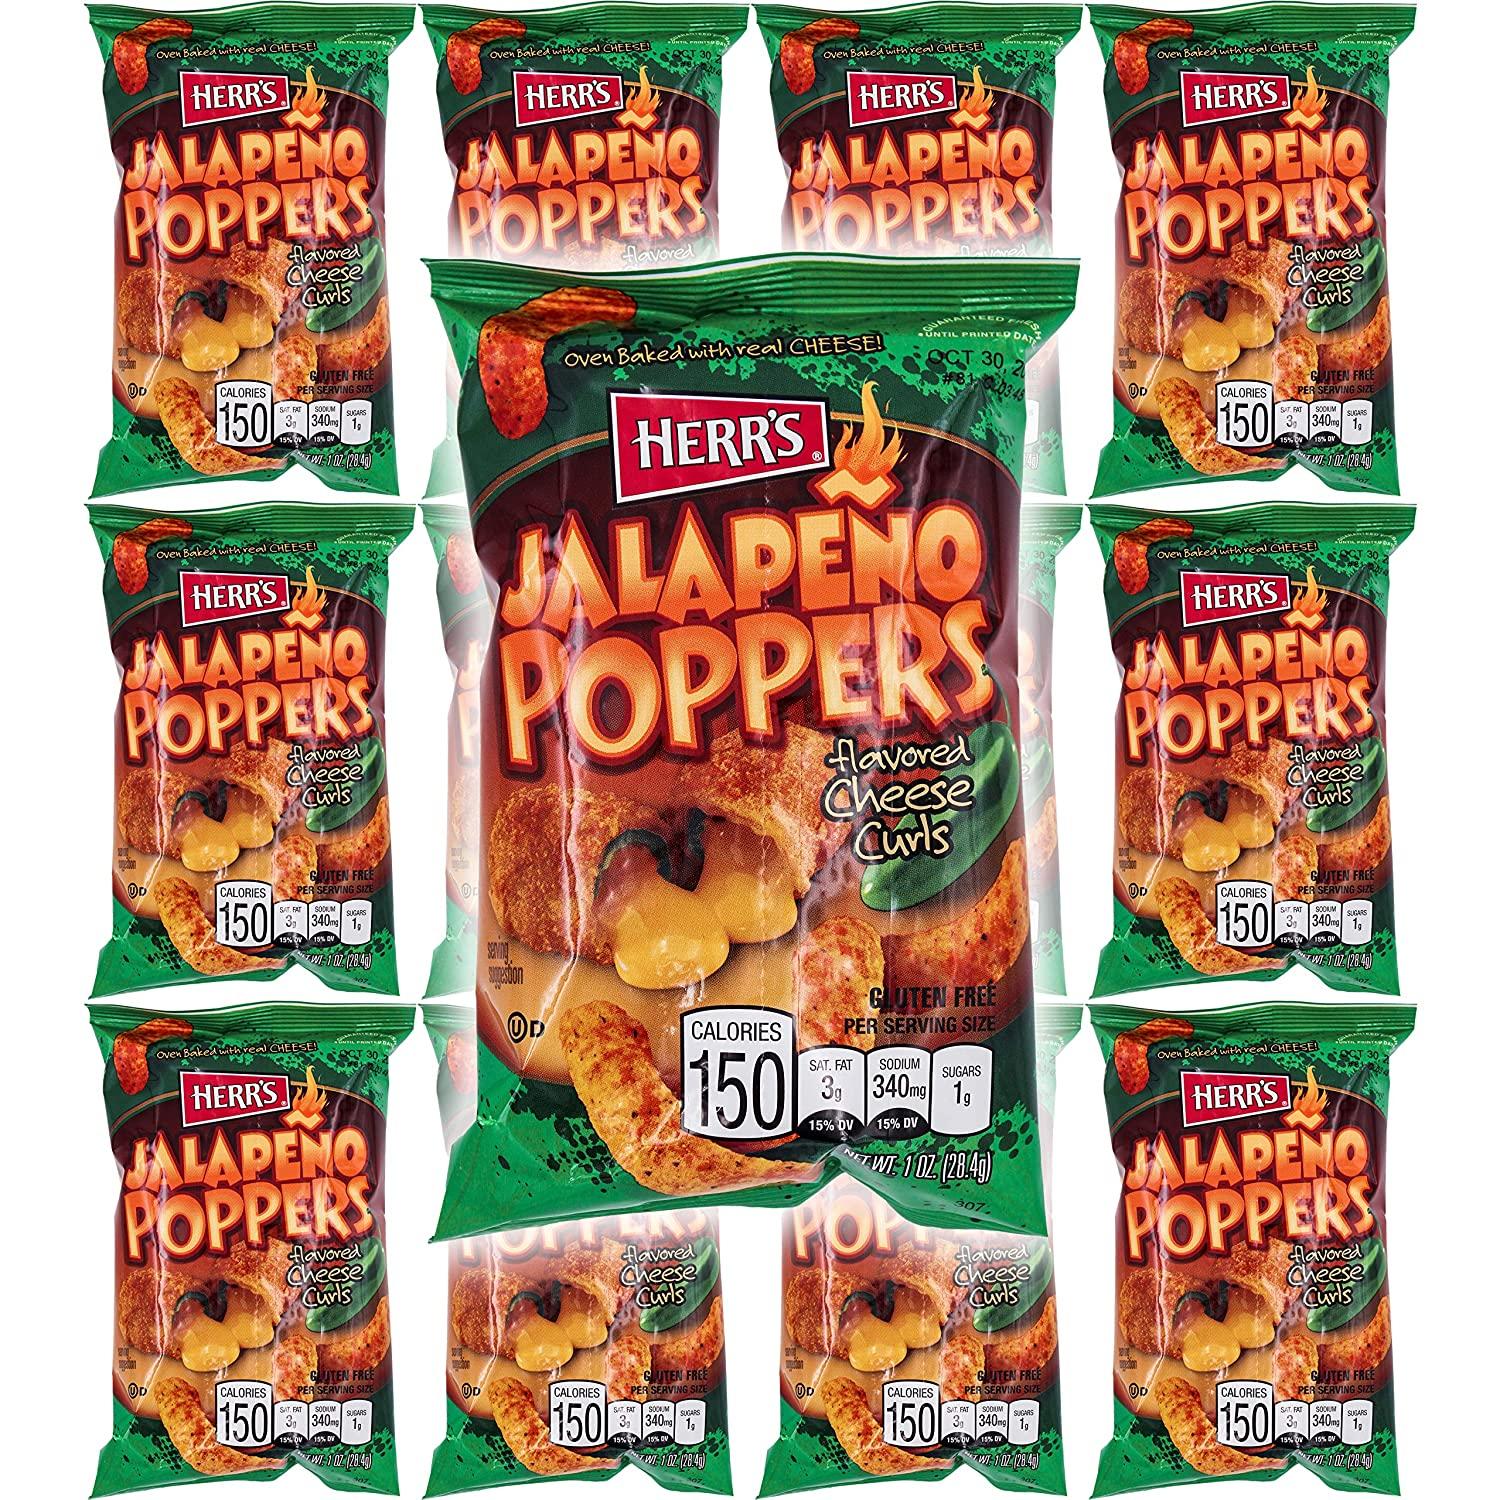 HERR'S Jalapeno Poppers Flavored Cheese Curls, Gluten-Free, 1oz Bag (Pack of 12, Total of 12 Oz)